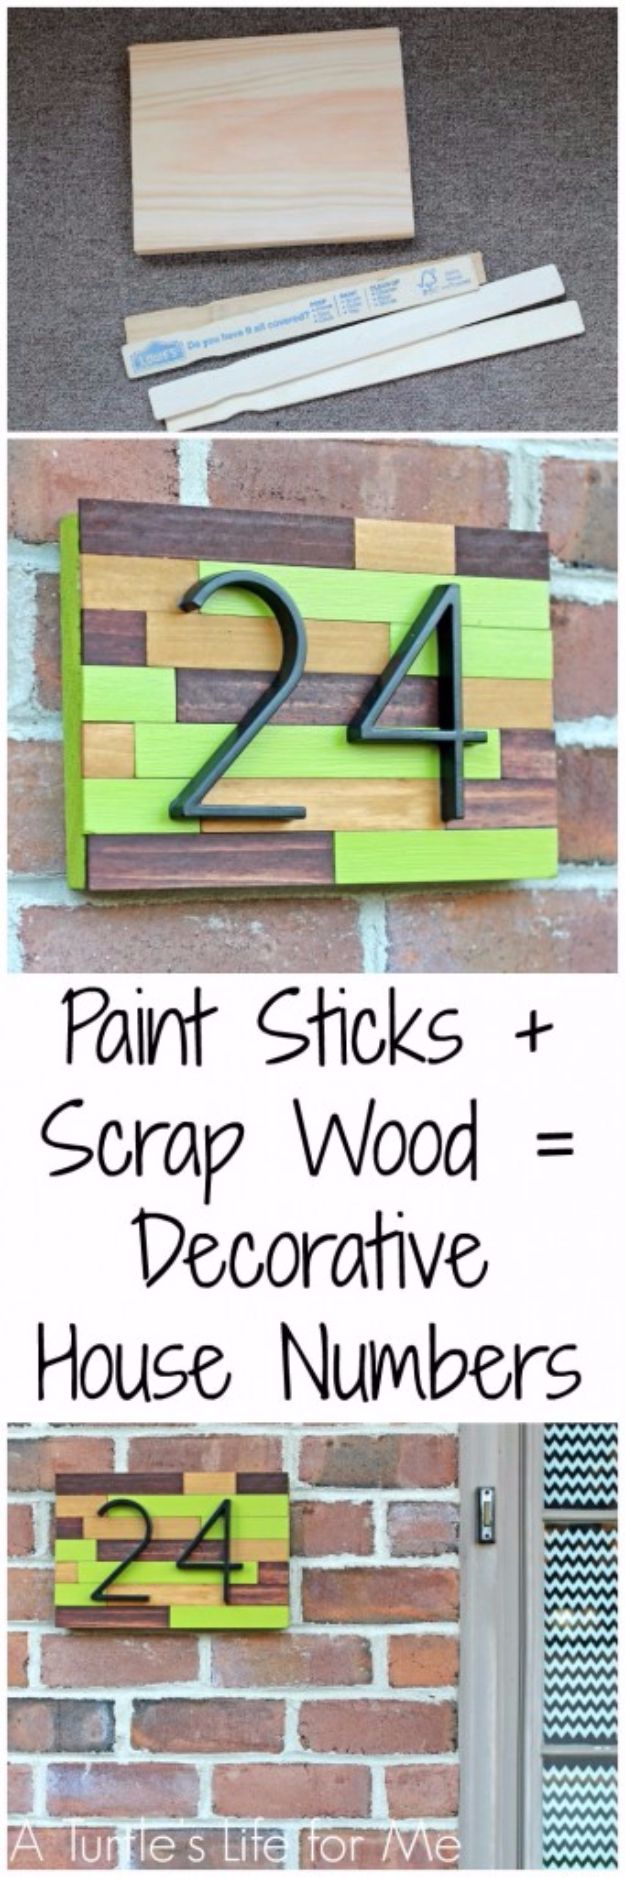 15 Creative Ways To Display Your House Number With DIY Projects